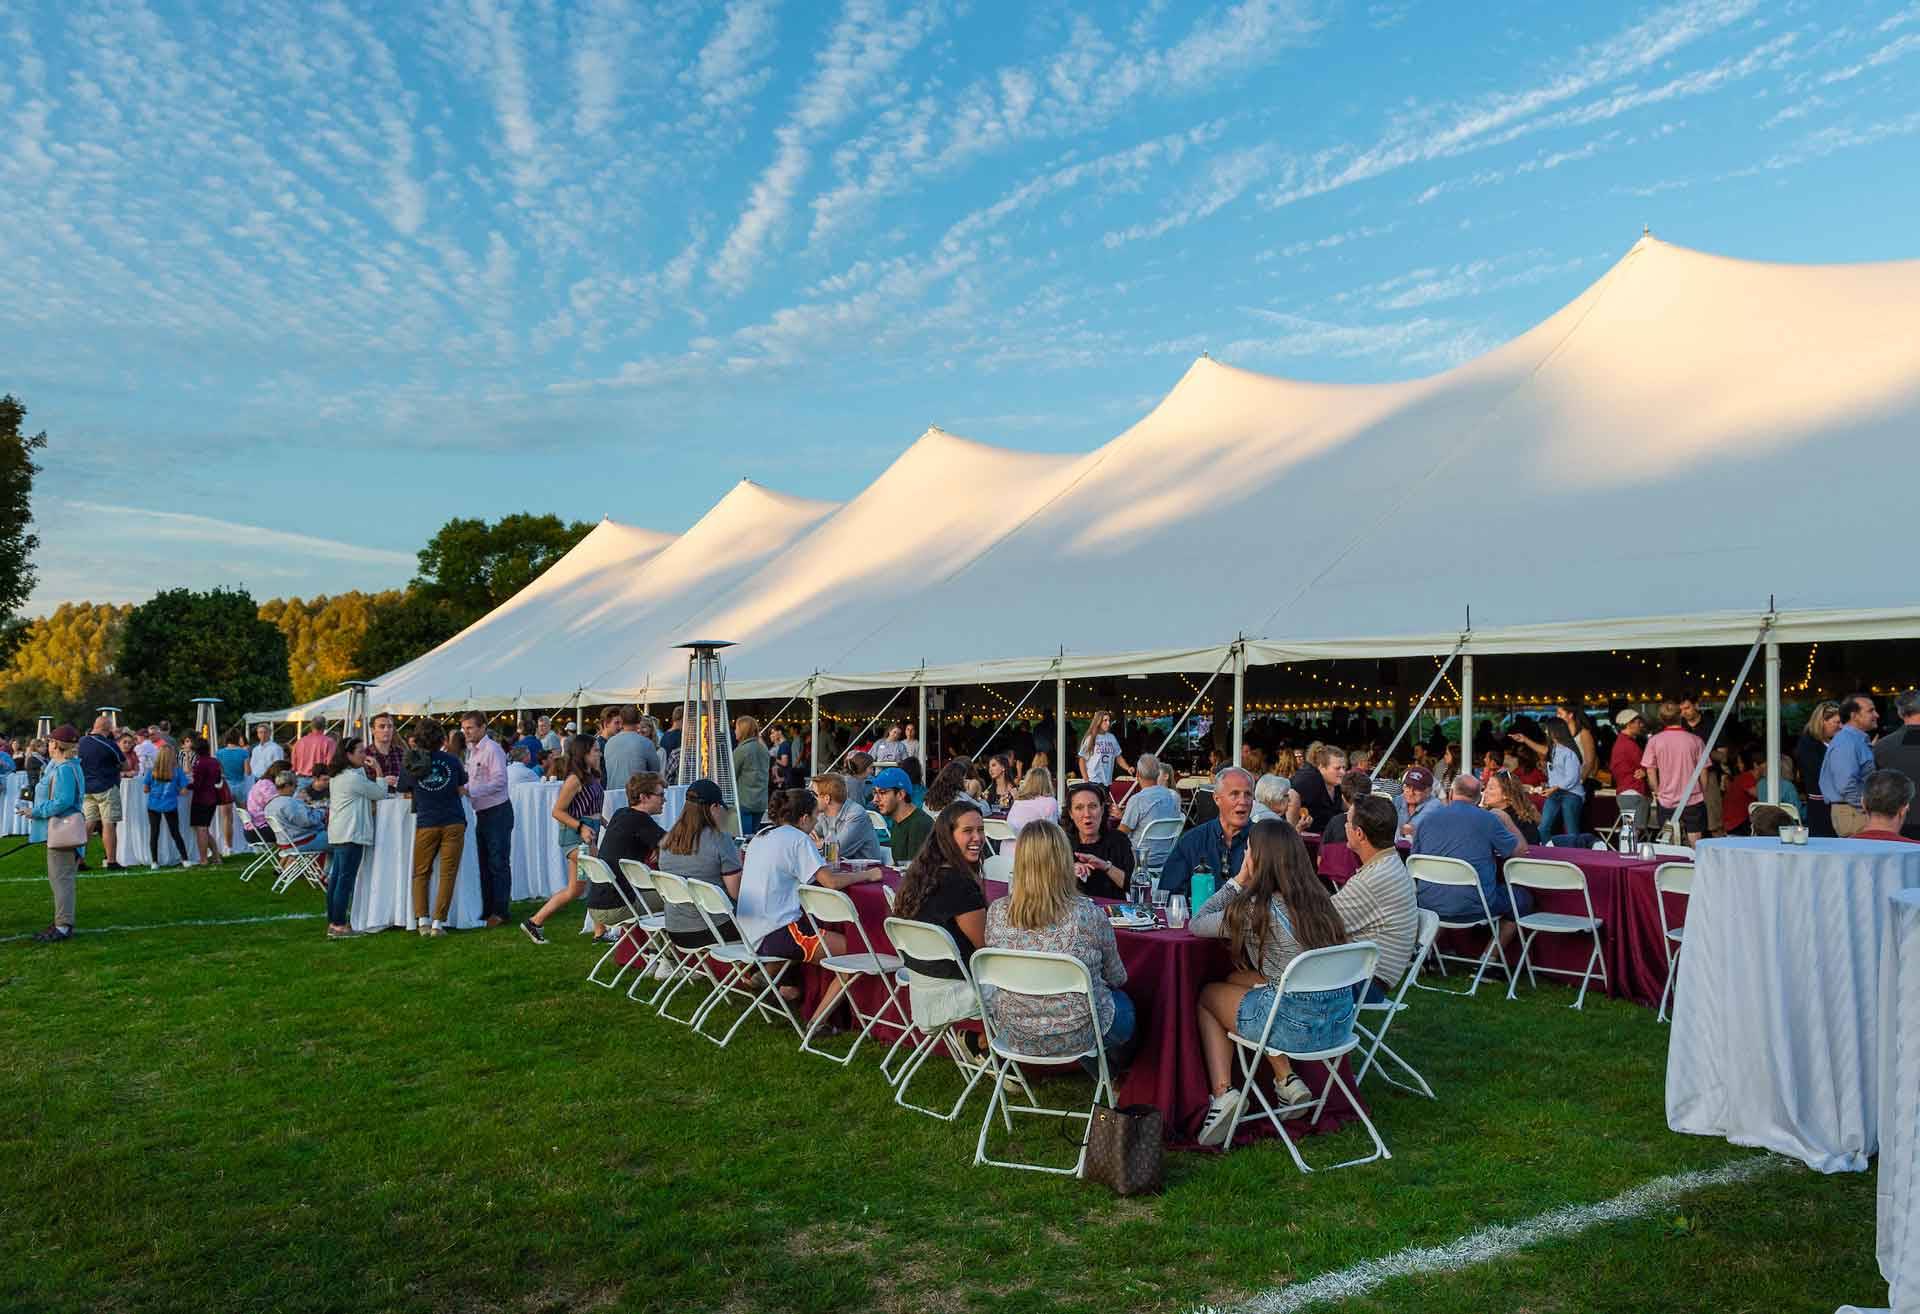 Families seated at tables in front of white tent under a blue sky